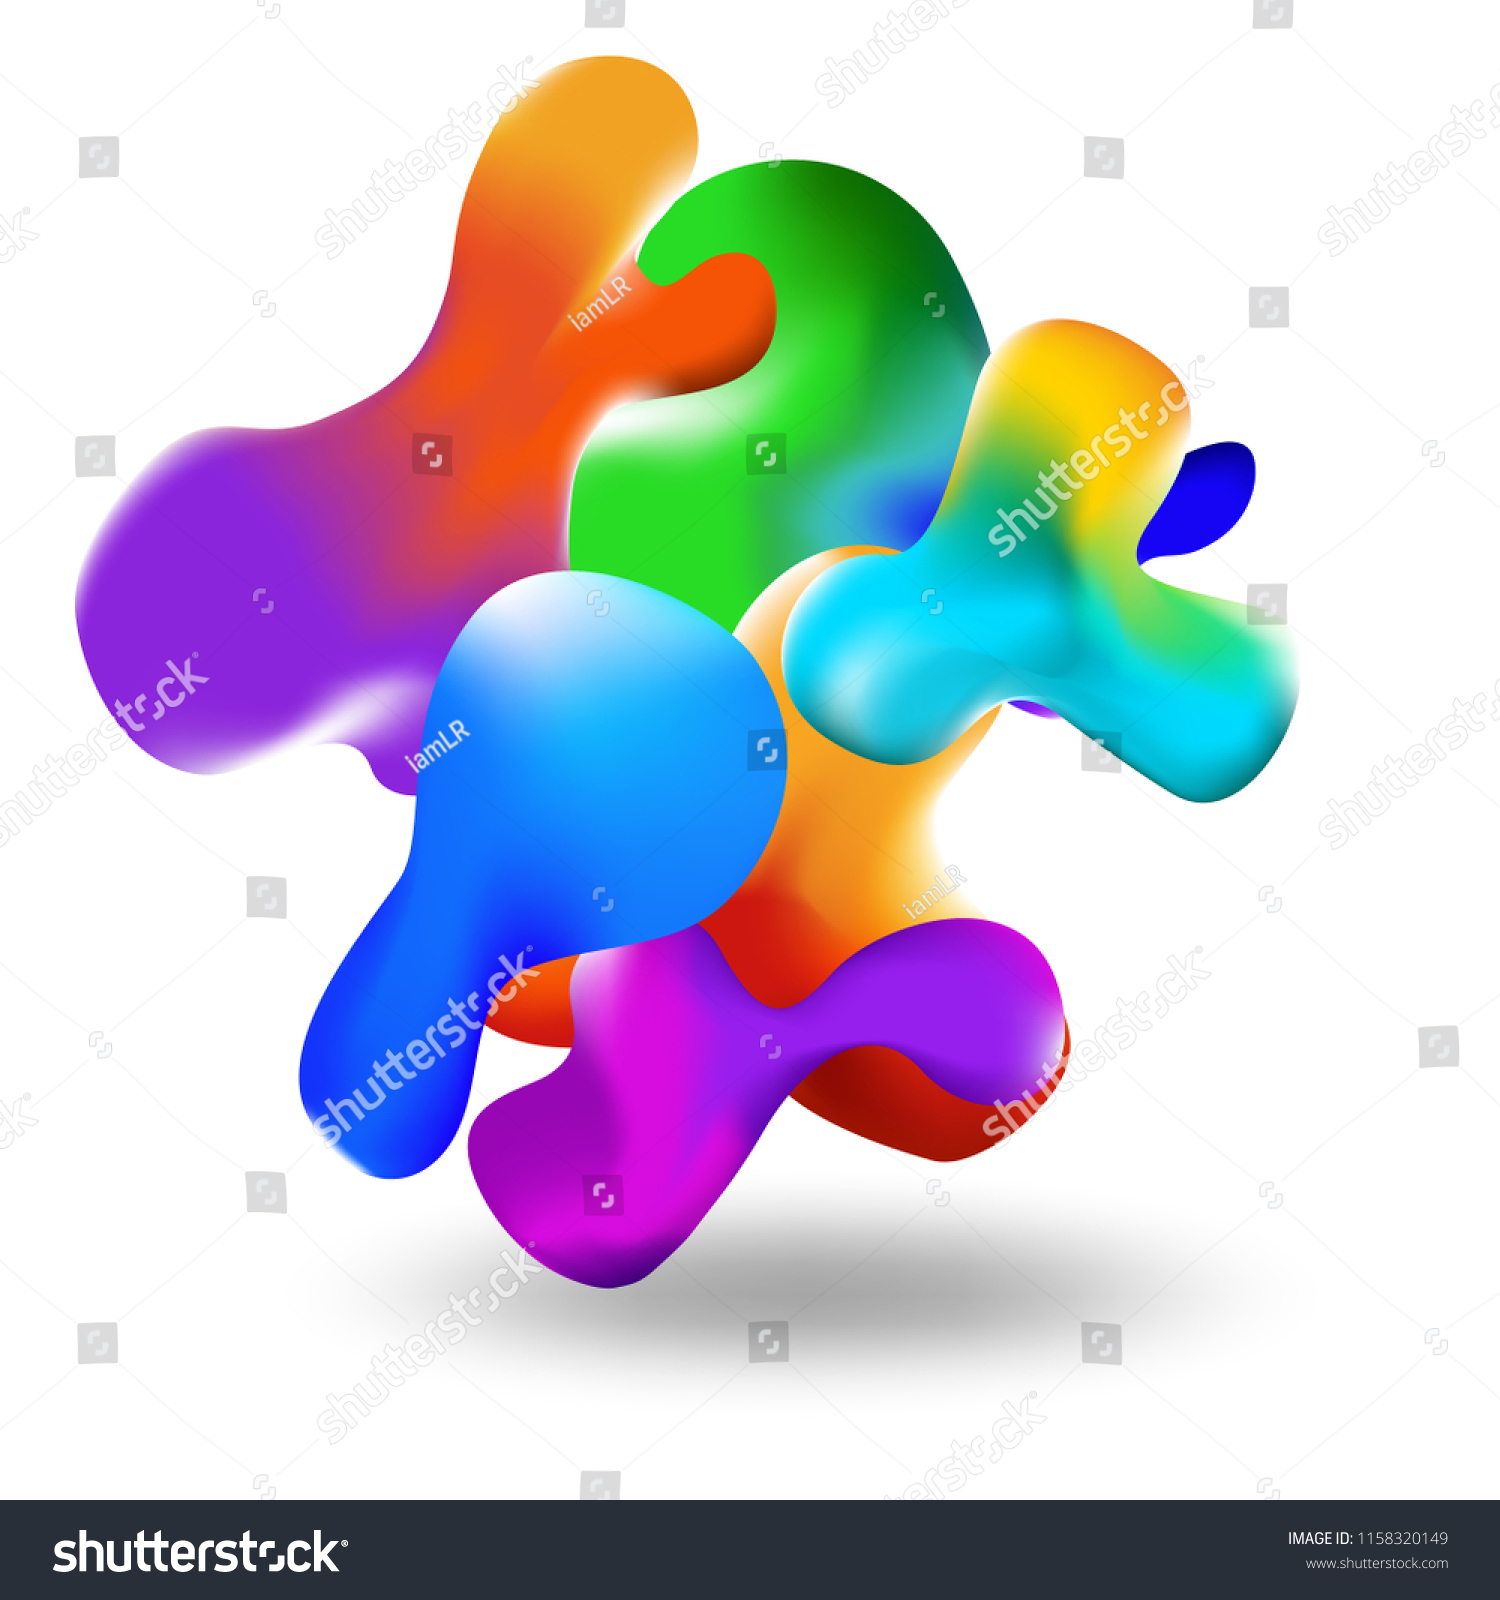 Liquid multi-colored background. Liquid form for color. Eps10 vector. Texture for sites, landings and background #1158320149